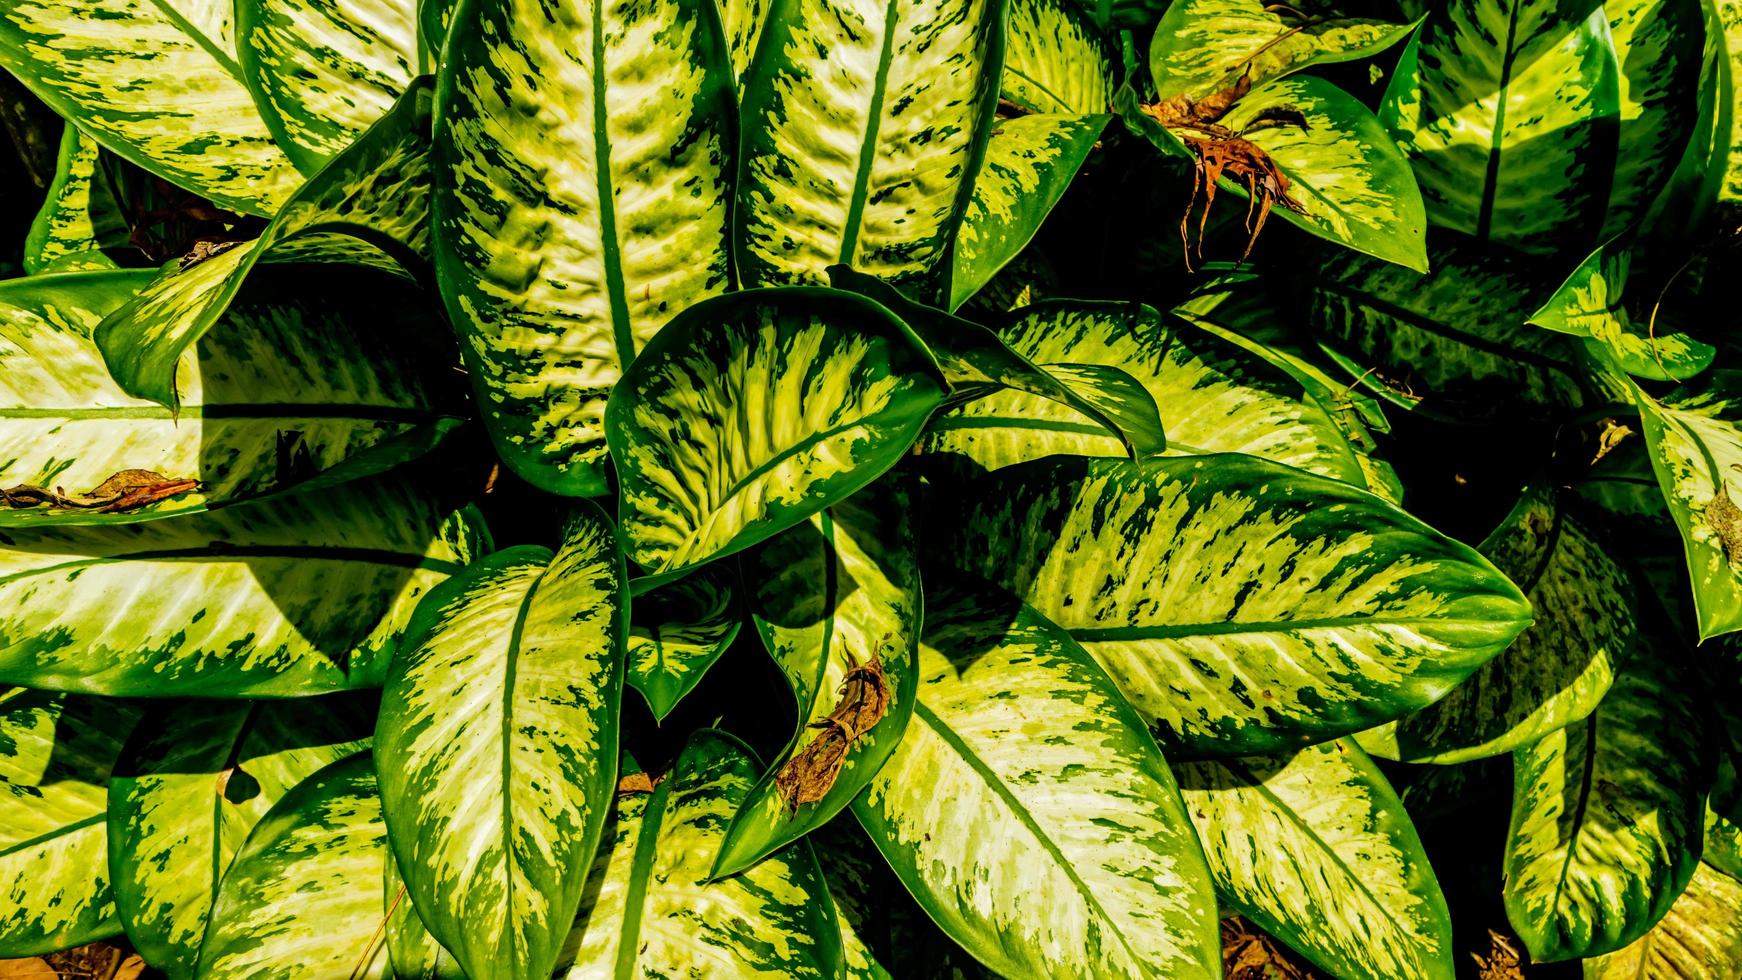 Dieffenbachia plant leaves in the background photo